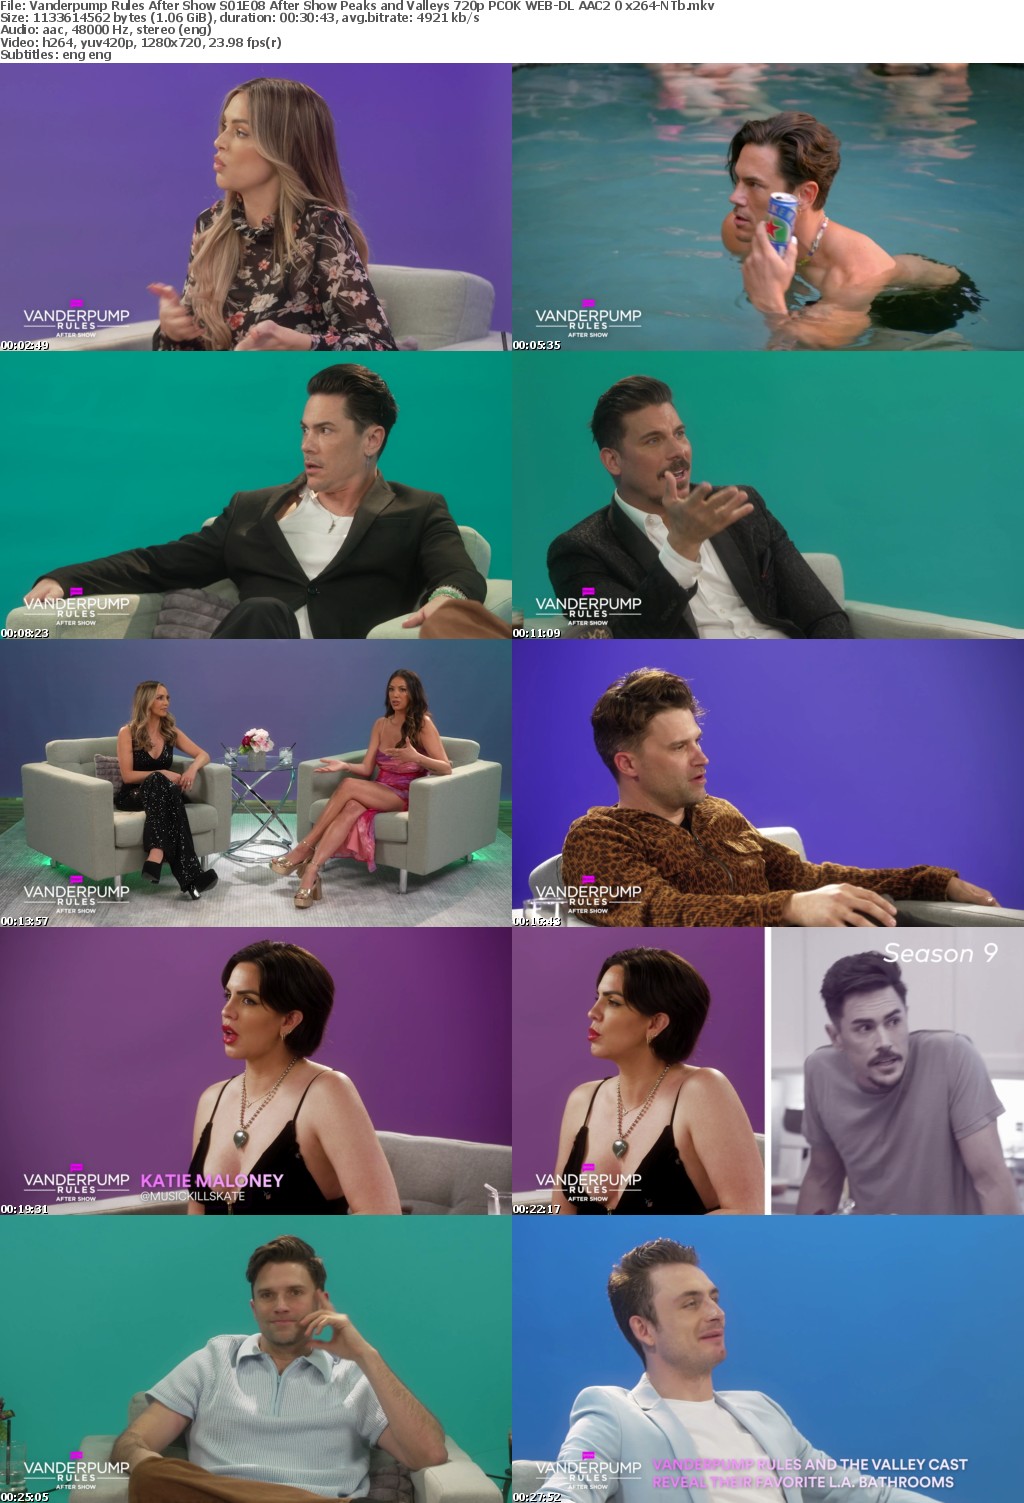 Vanderpump Rules After Show S01E08 After Show Peaks and Valleys 720p PCOK WEB-DL AAC2 0 x264-NTb